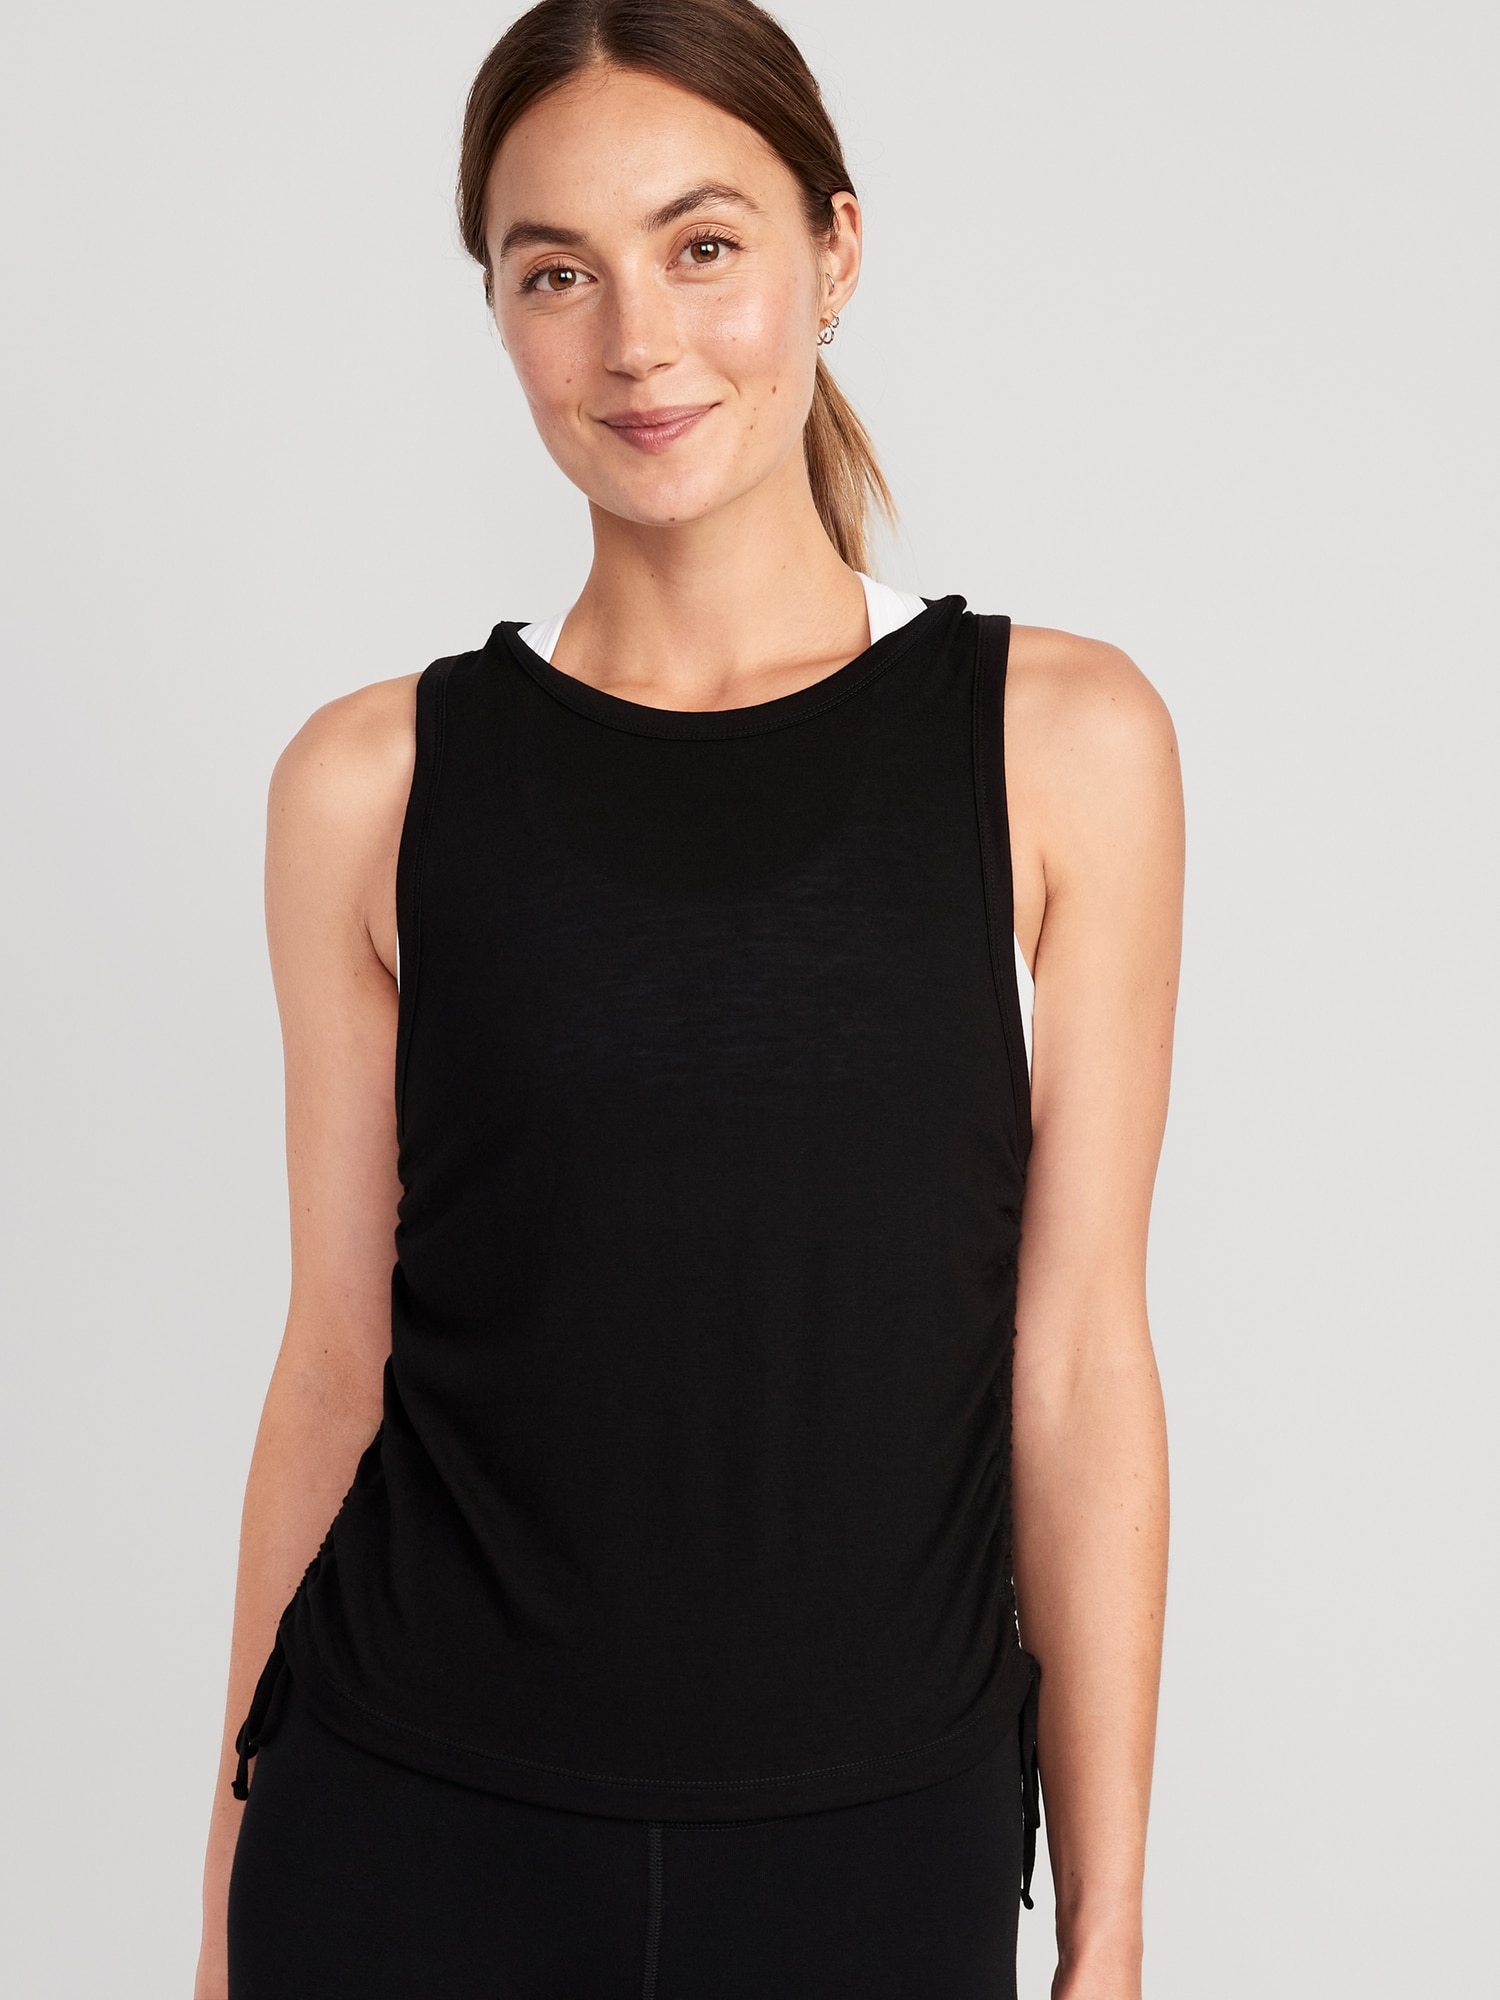 Old Navy UltraLite Ruched Tie Tank Top for Women black. 1